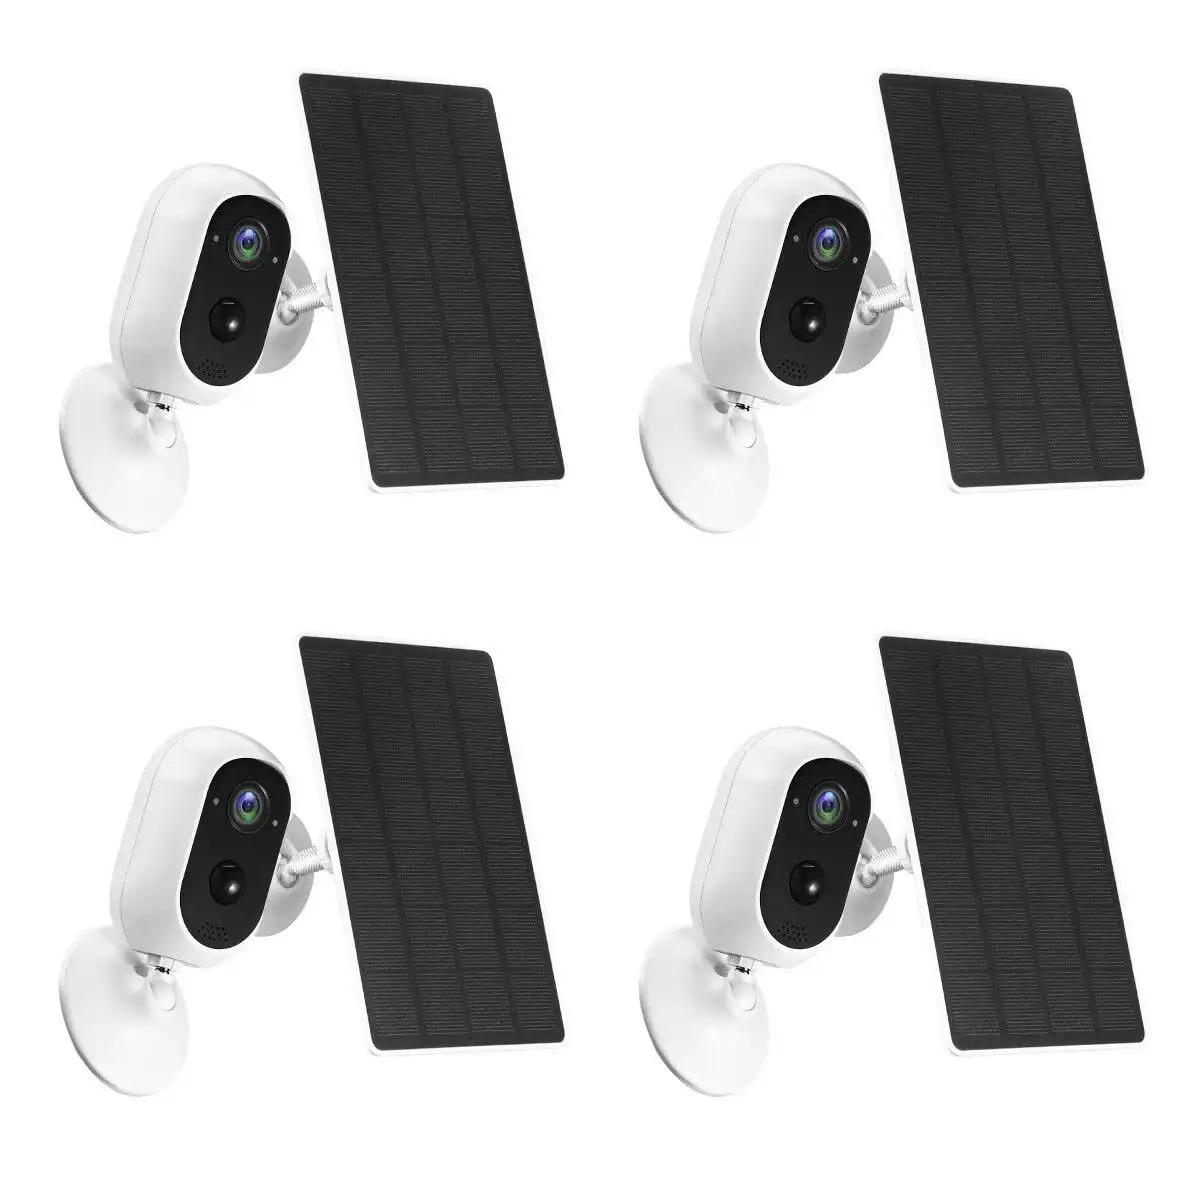 Ausway WiFi Camera CCTV Home Security Wireless Outdoor Surveillance System with Solar Powered Batteries x4